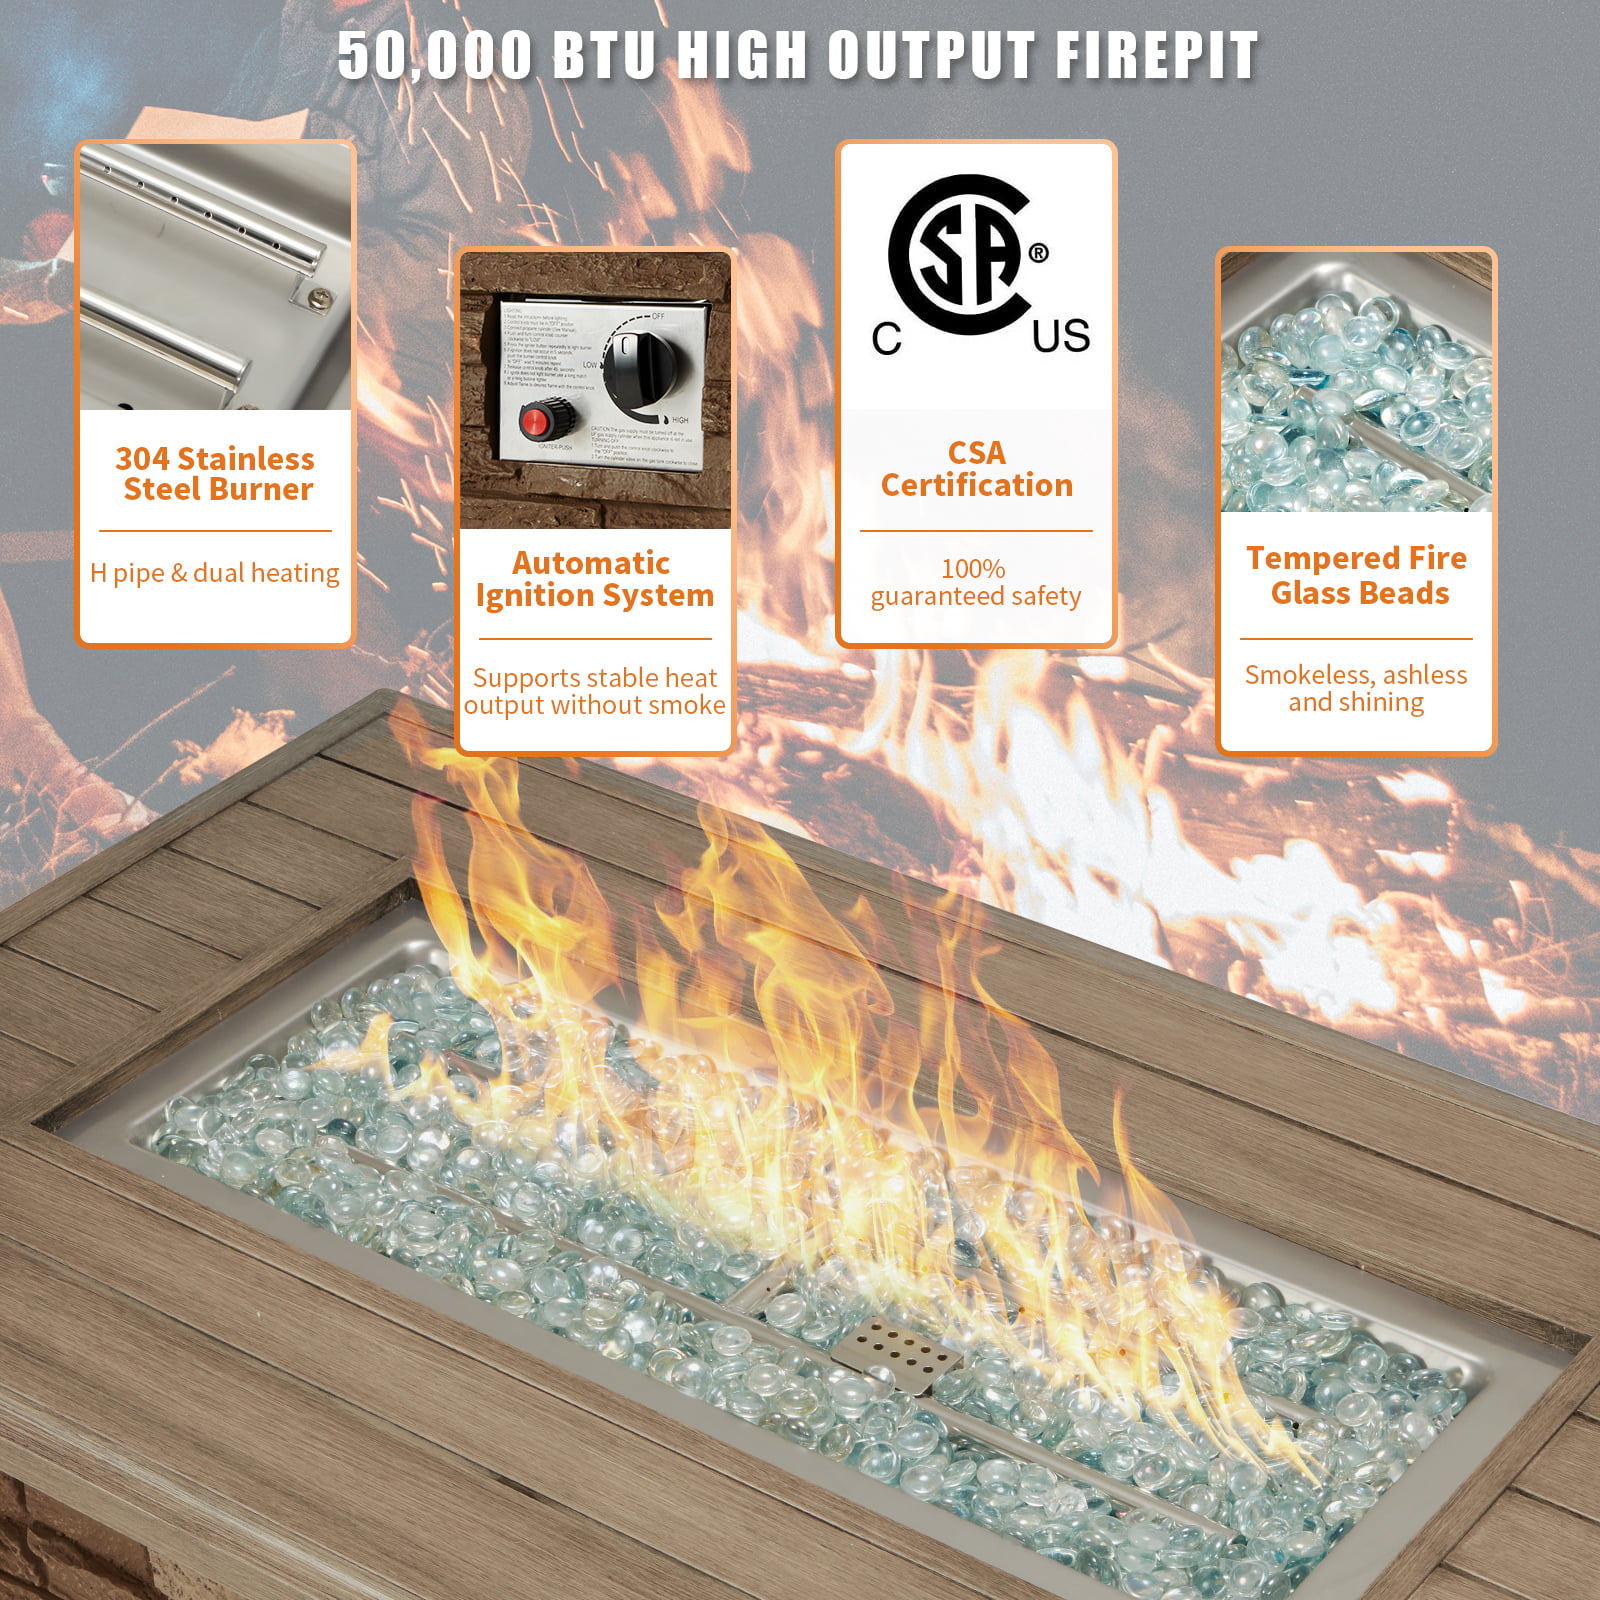 Coffee 50,000 BTU Gas Fire Table with CSA Certification Hand-Painted Table Top Waterproof Cover Vicluke 44 Inch Aluminum Propane Fire Pit Table with Faux Ledgestone Glass Rock for Outdoor Patio 